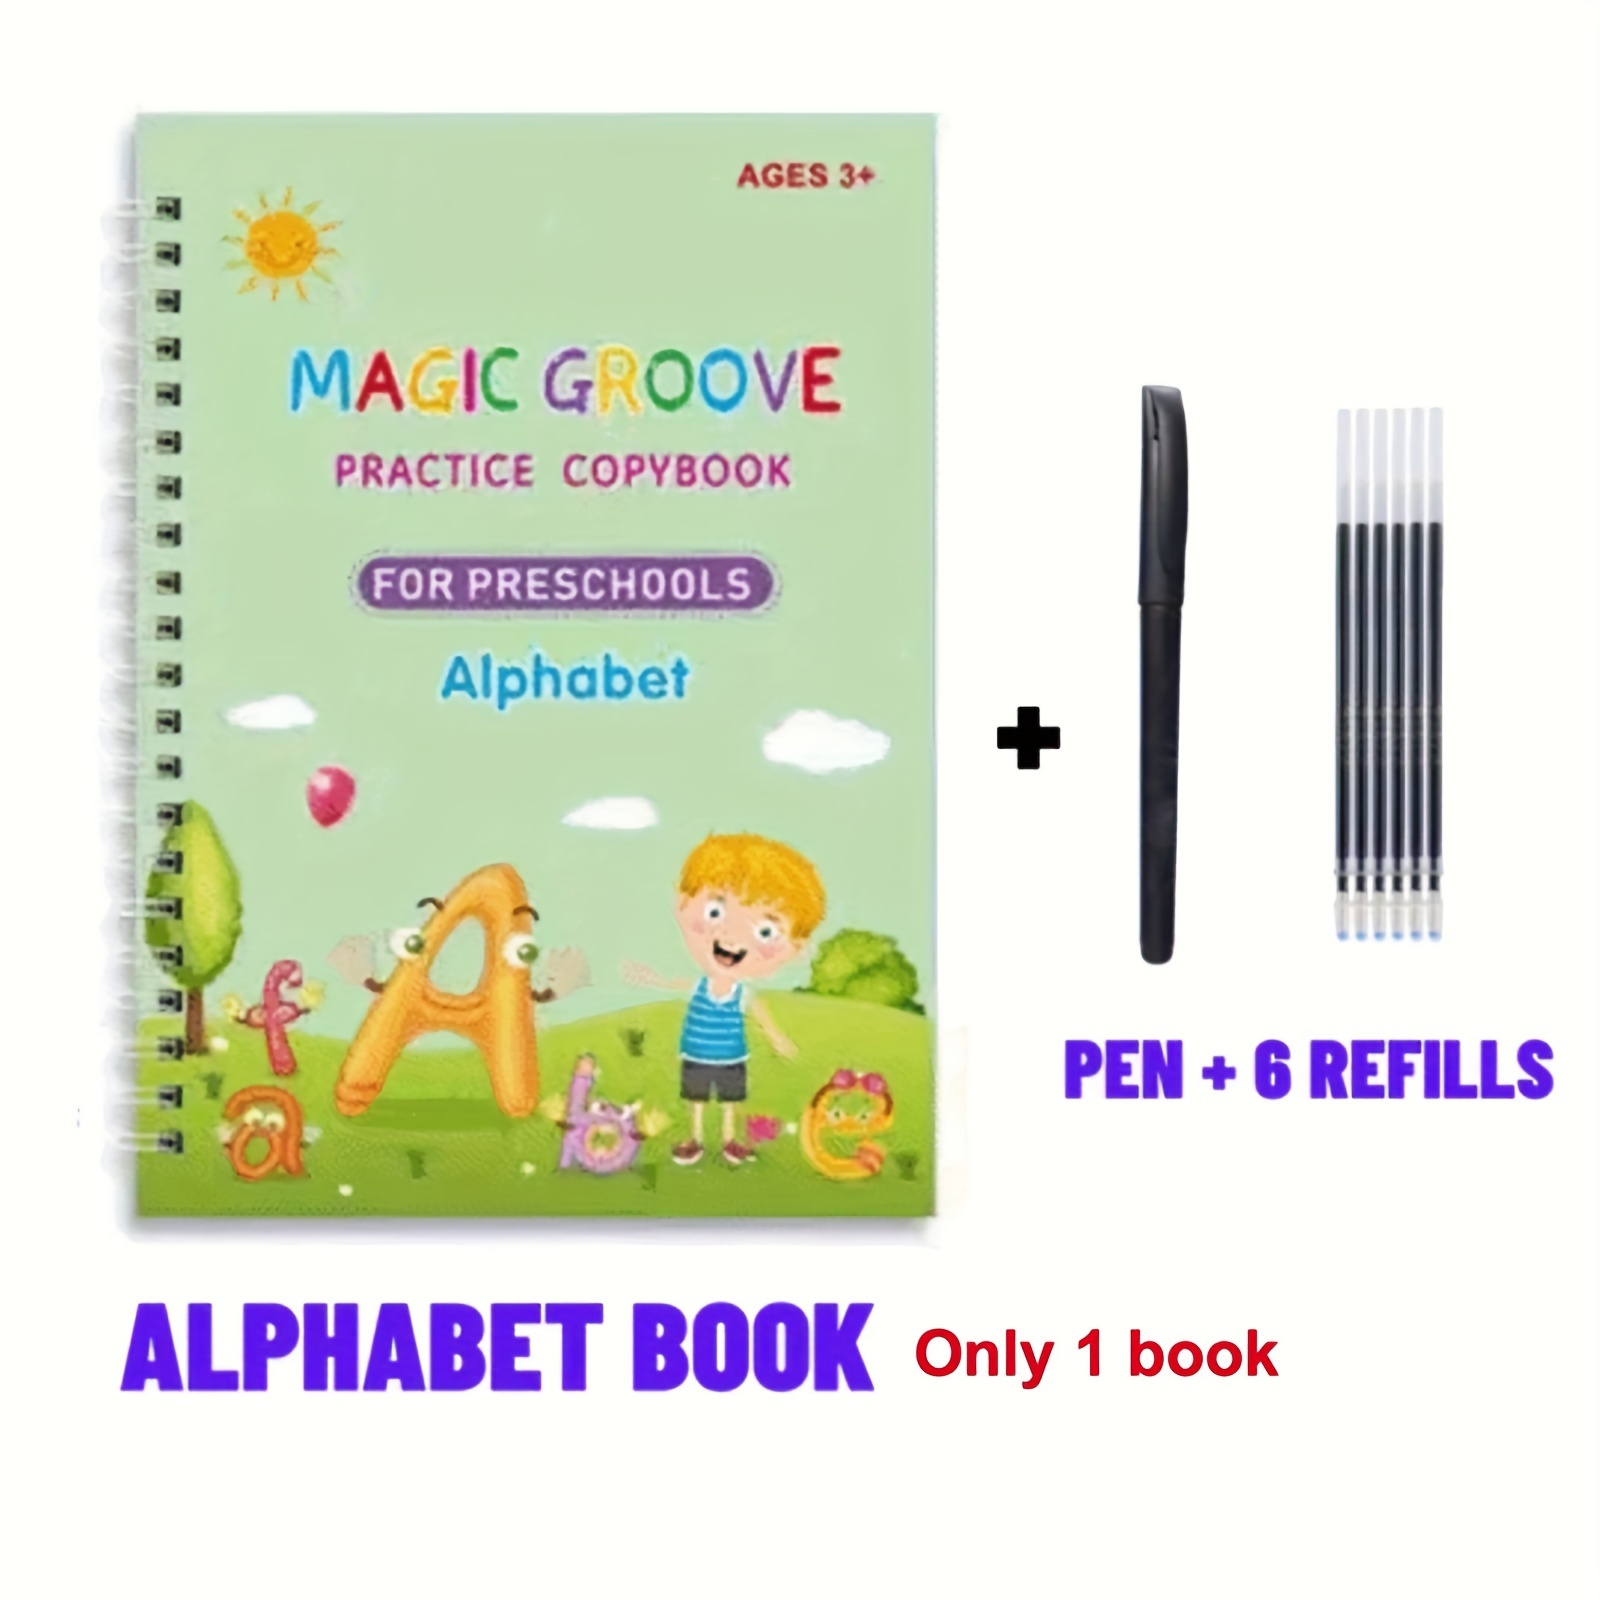 Review of the Groovd magic copybooks 